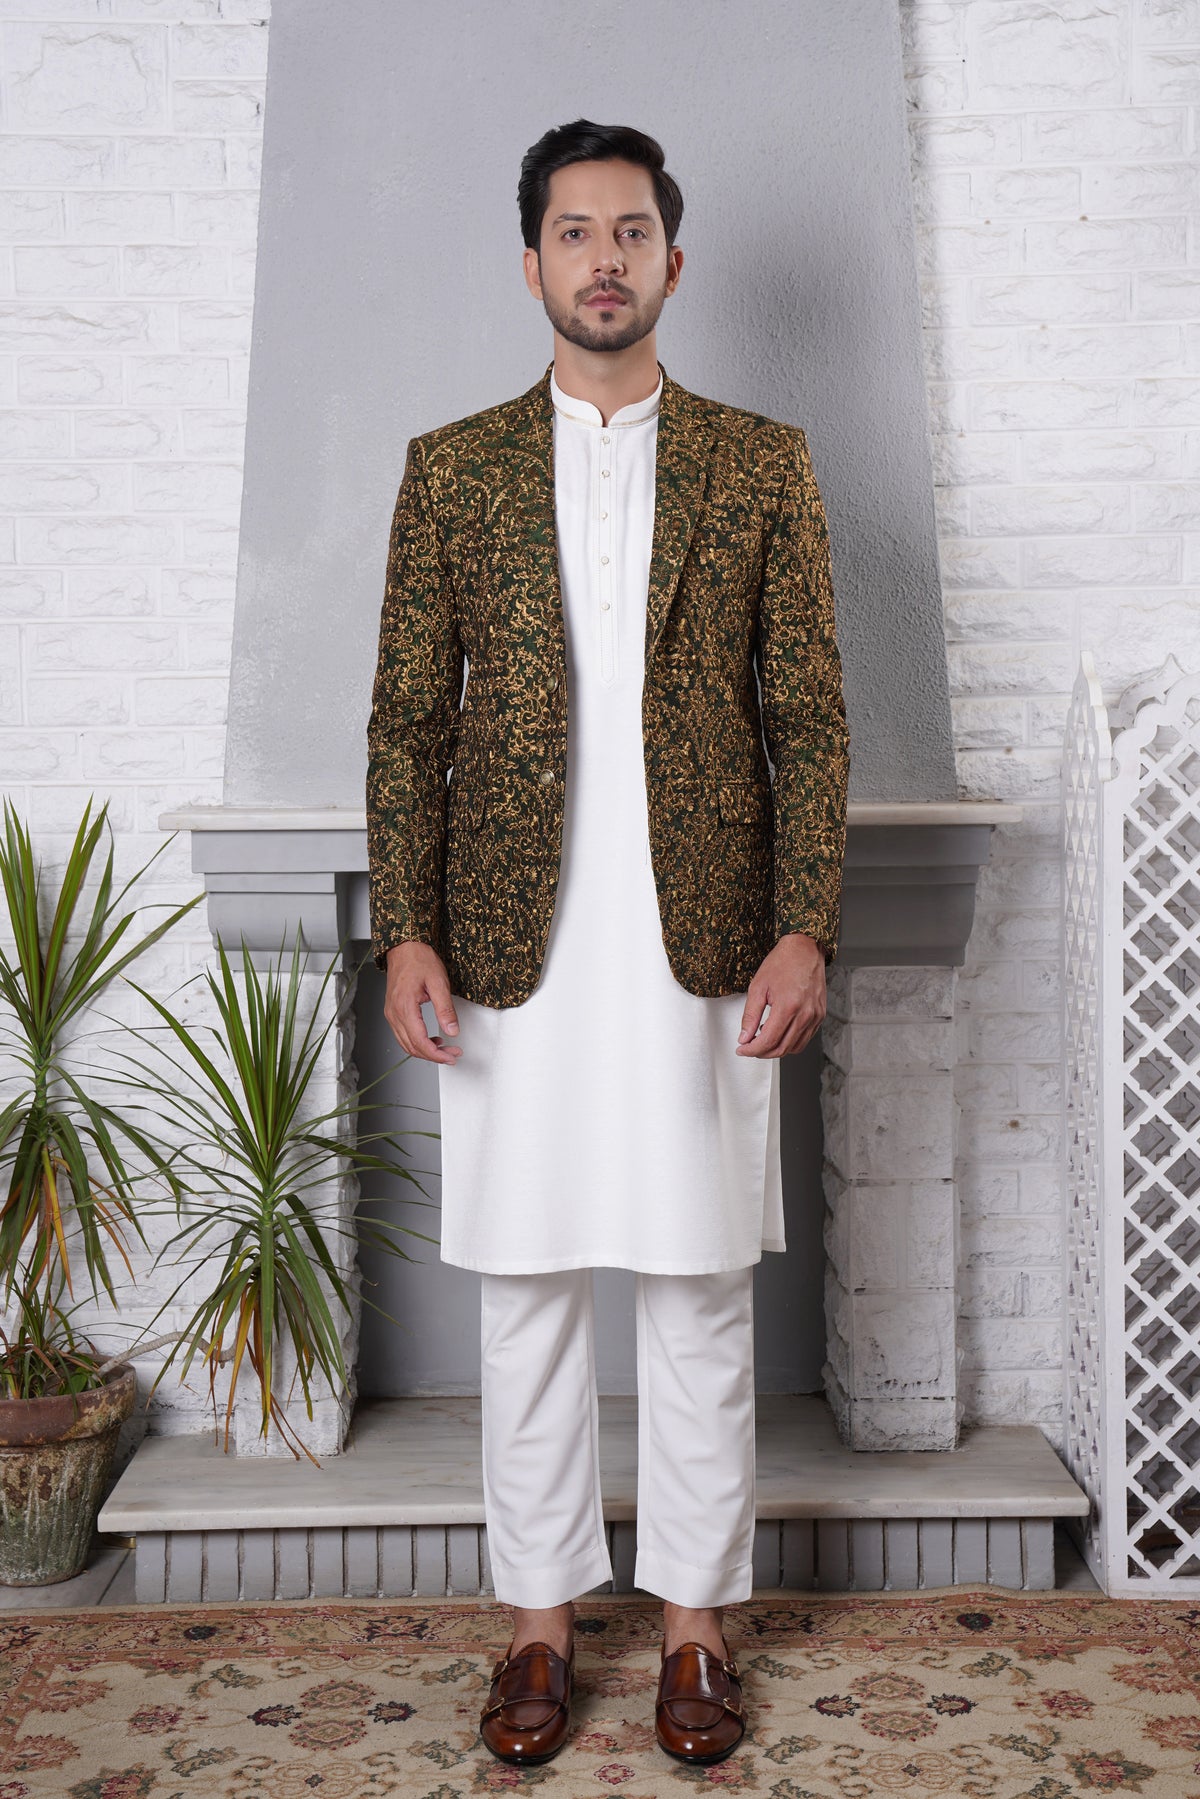 Prince Coat Black With Golden Embroidery